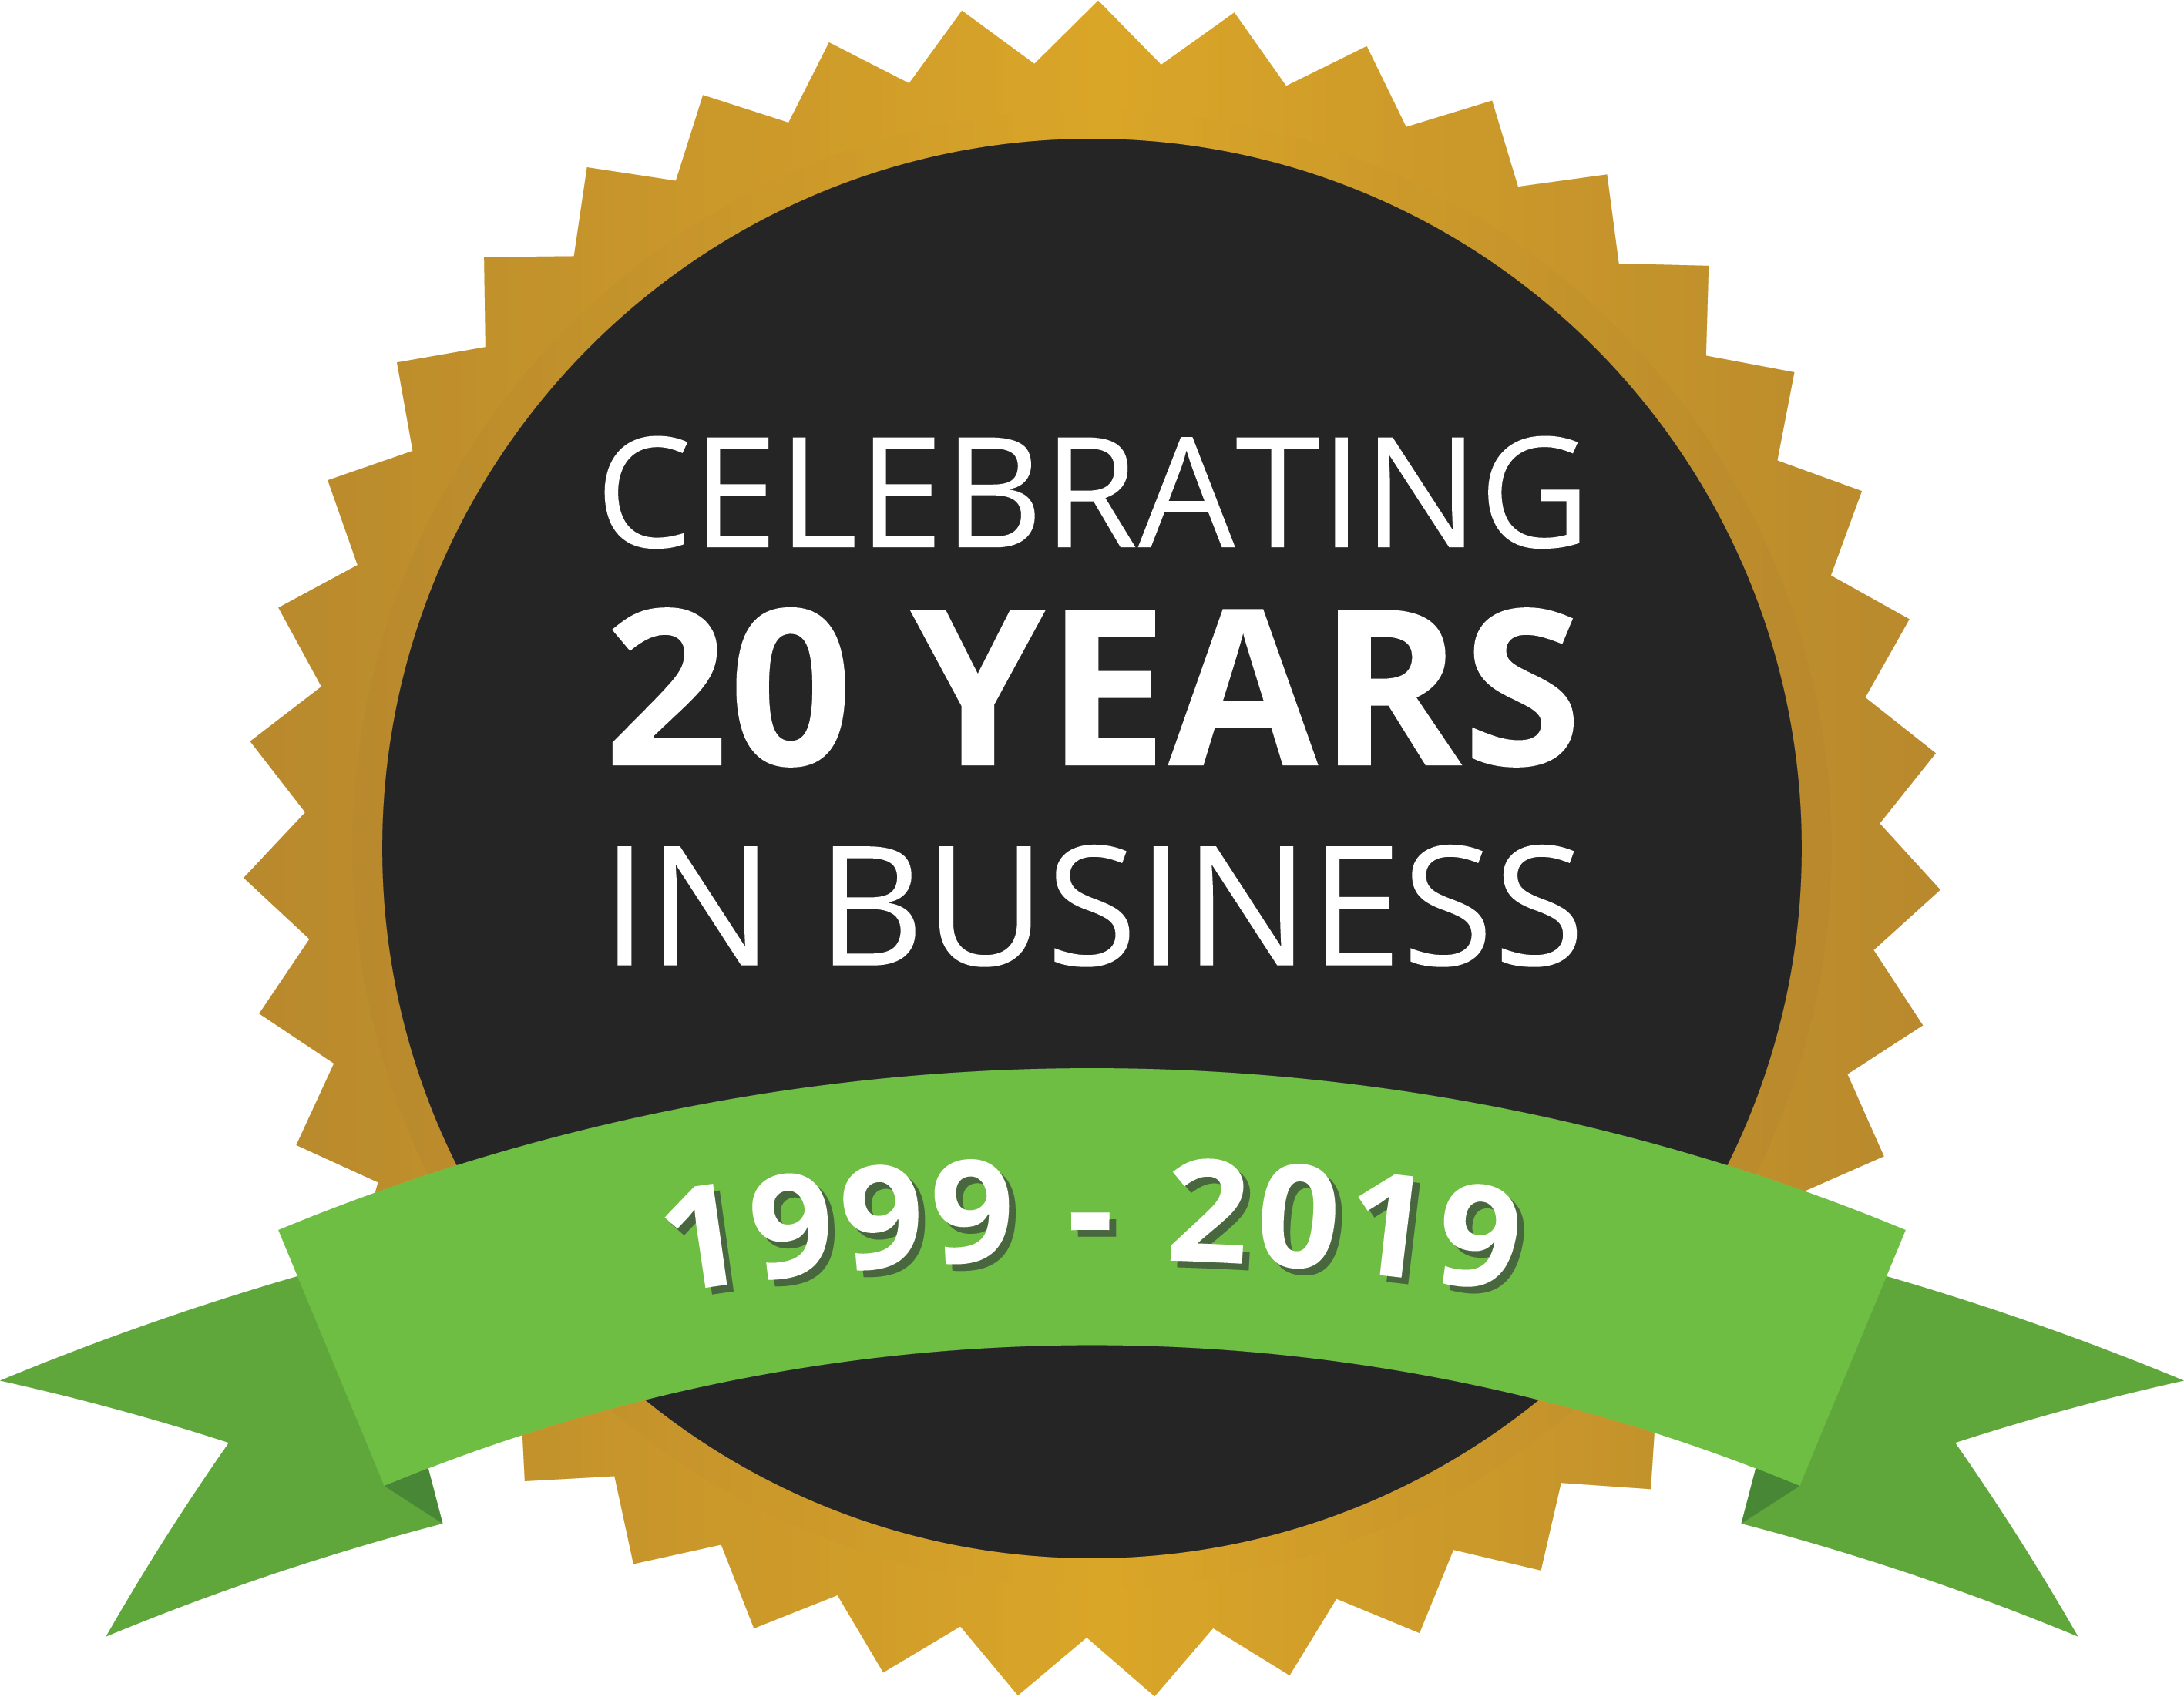 Celebrating 20 years in business star badge